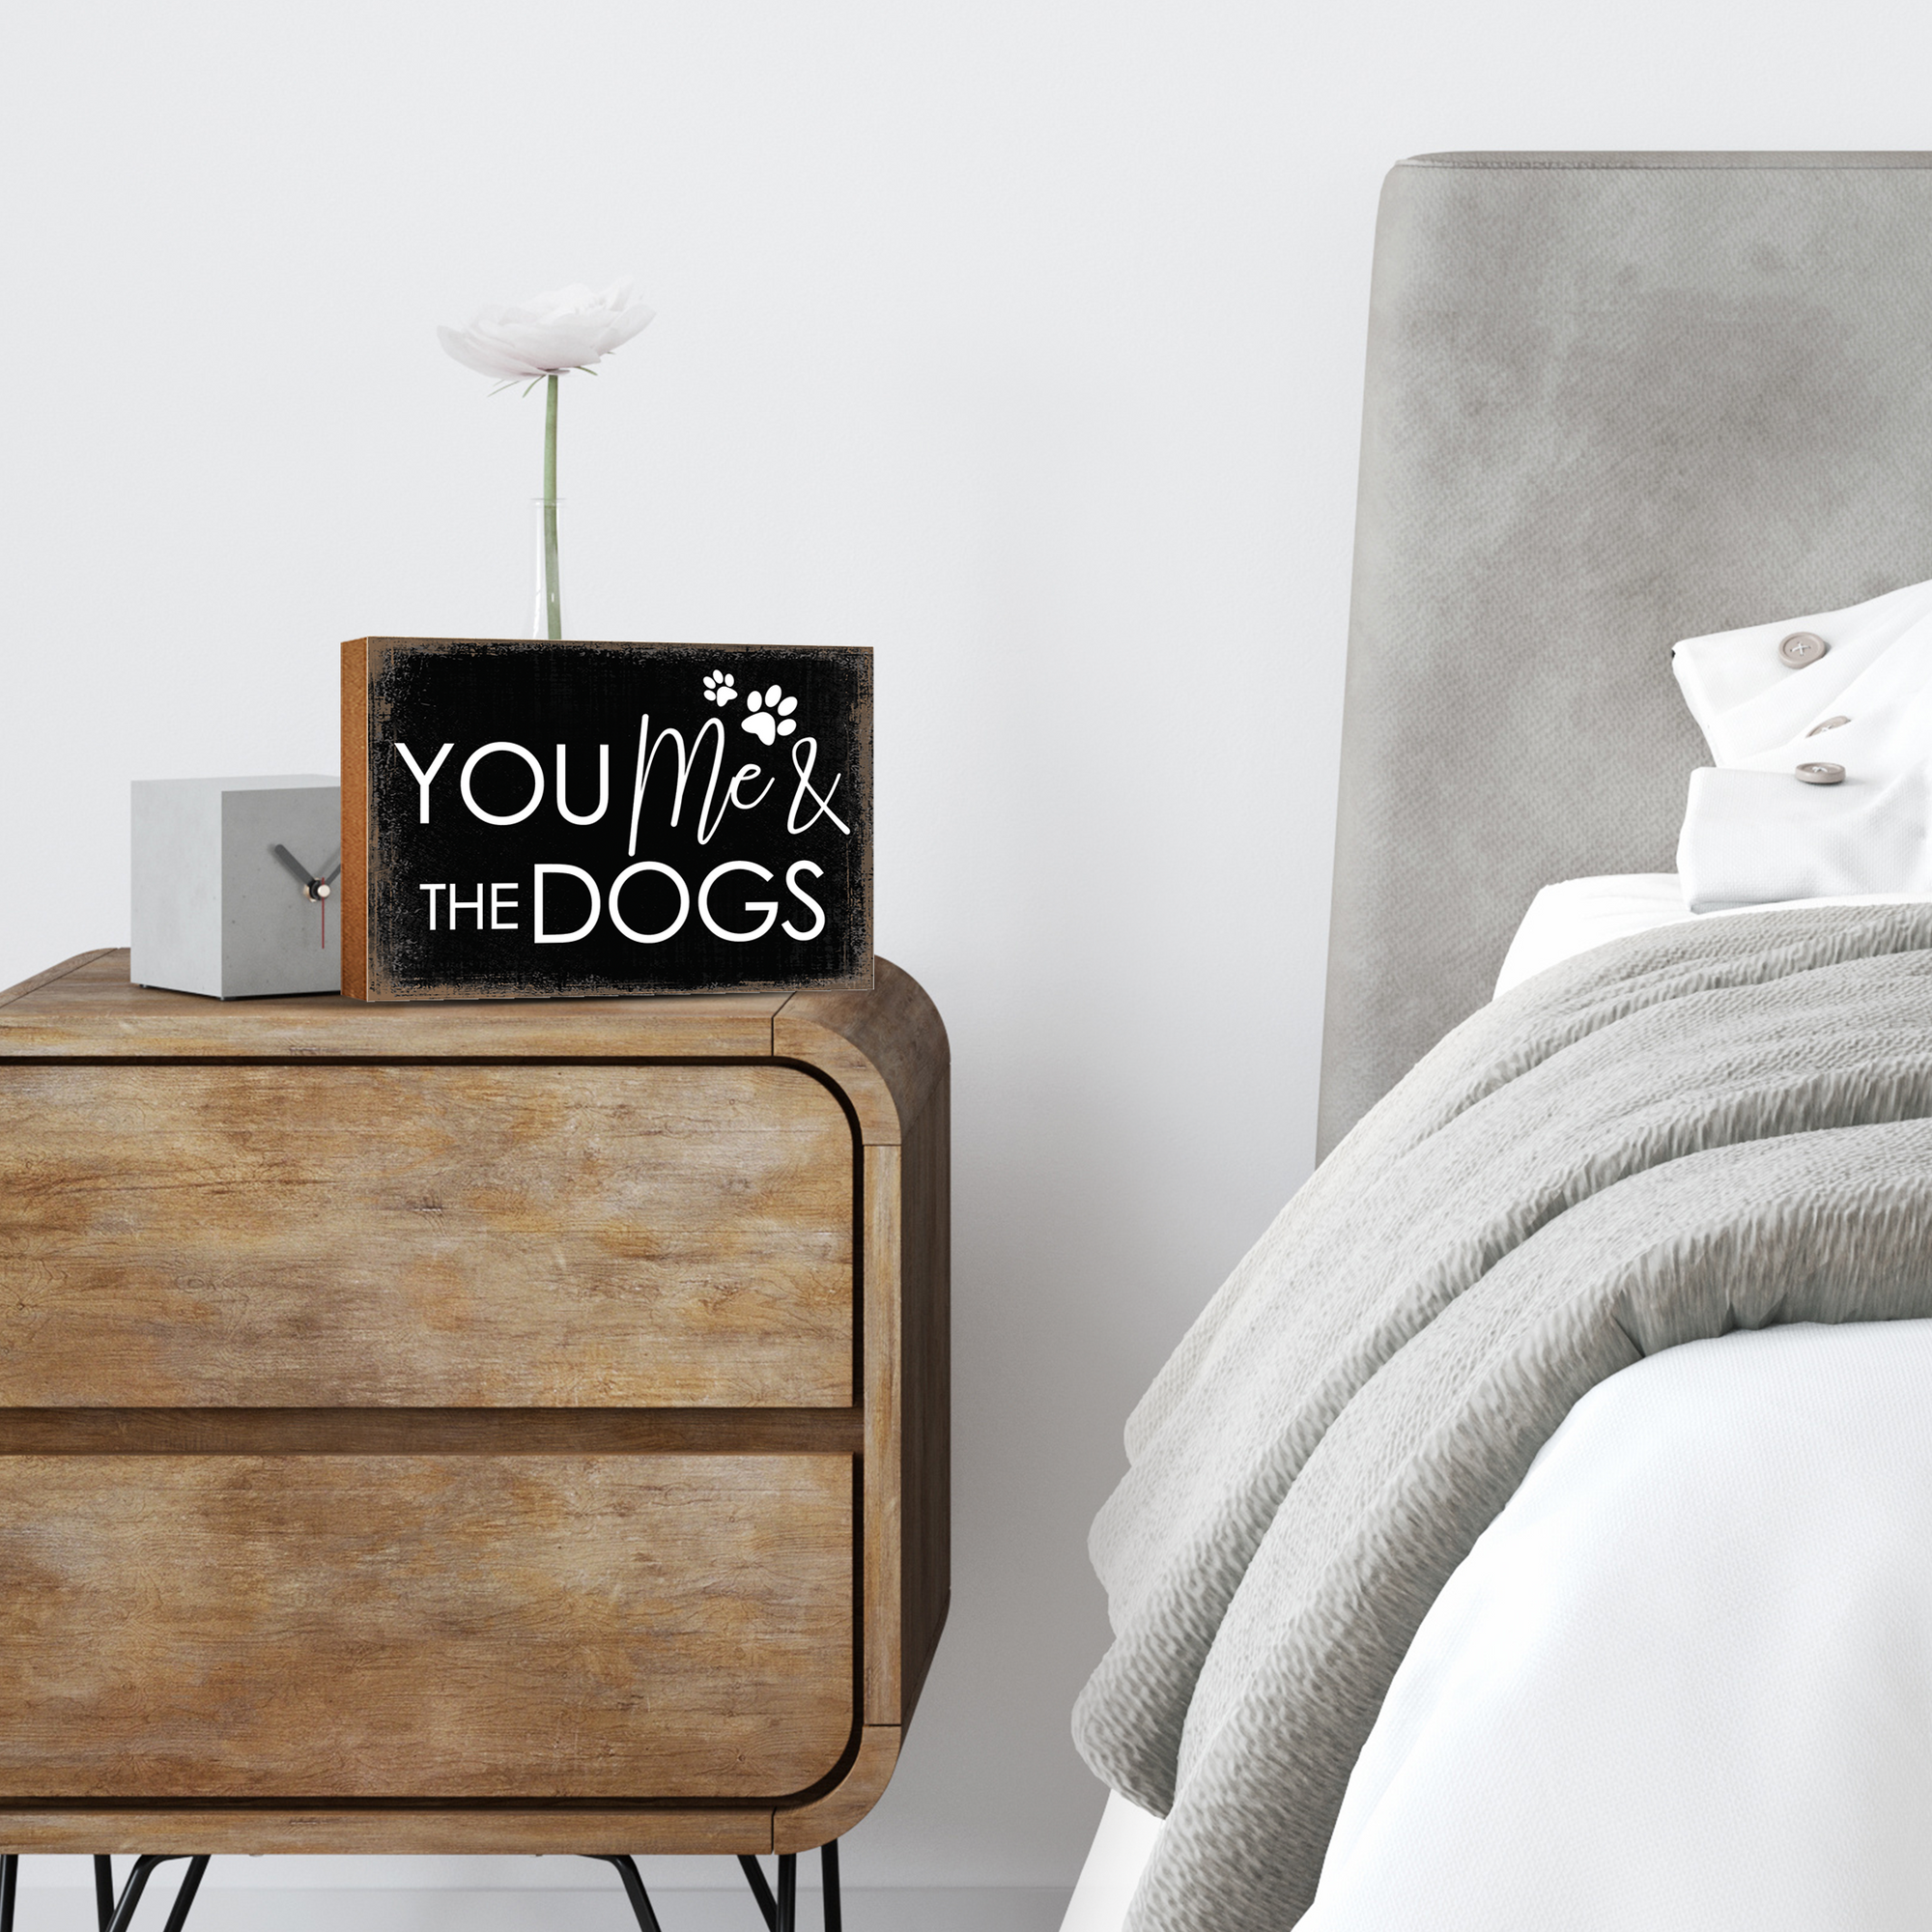 Wooden Shelf Decor and Tabletop Signs with Pet Verses - You Me Dogs